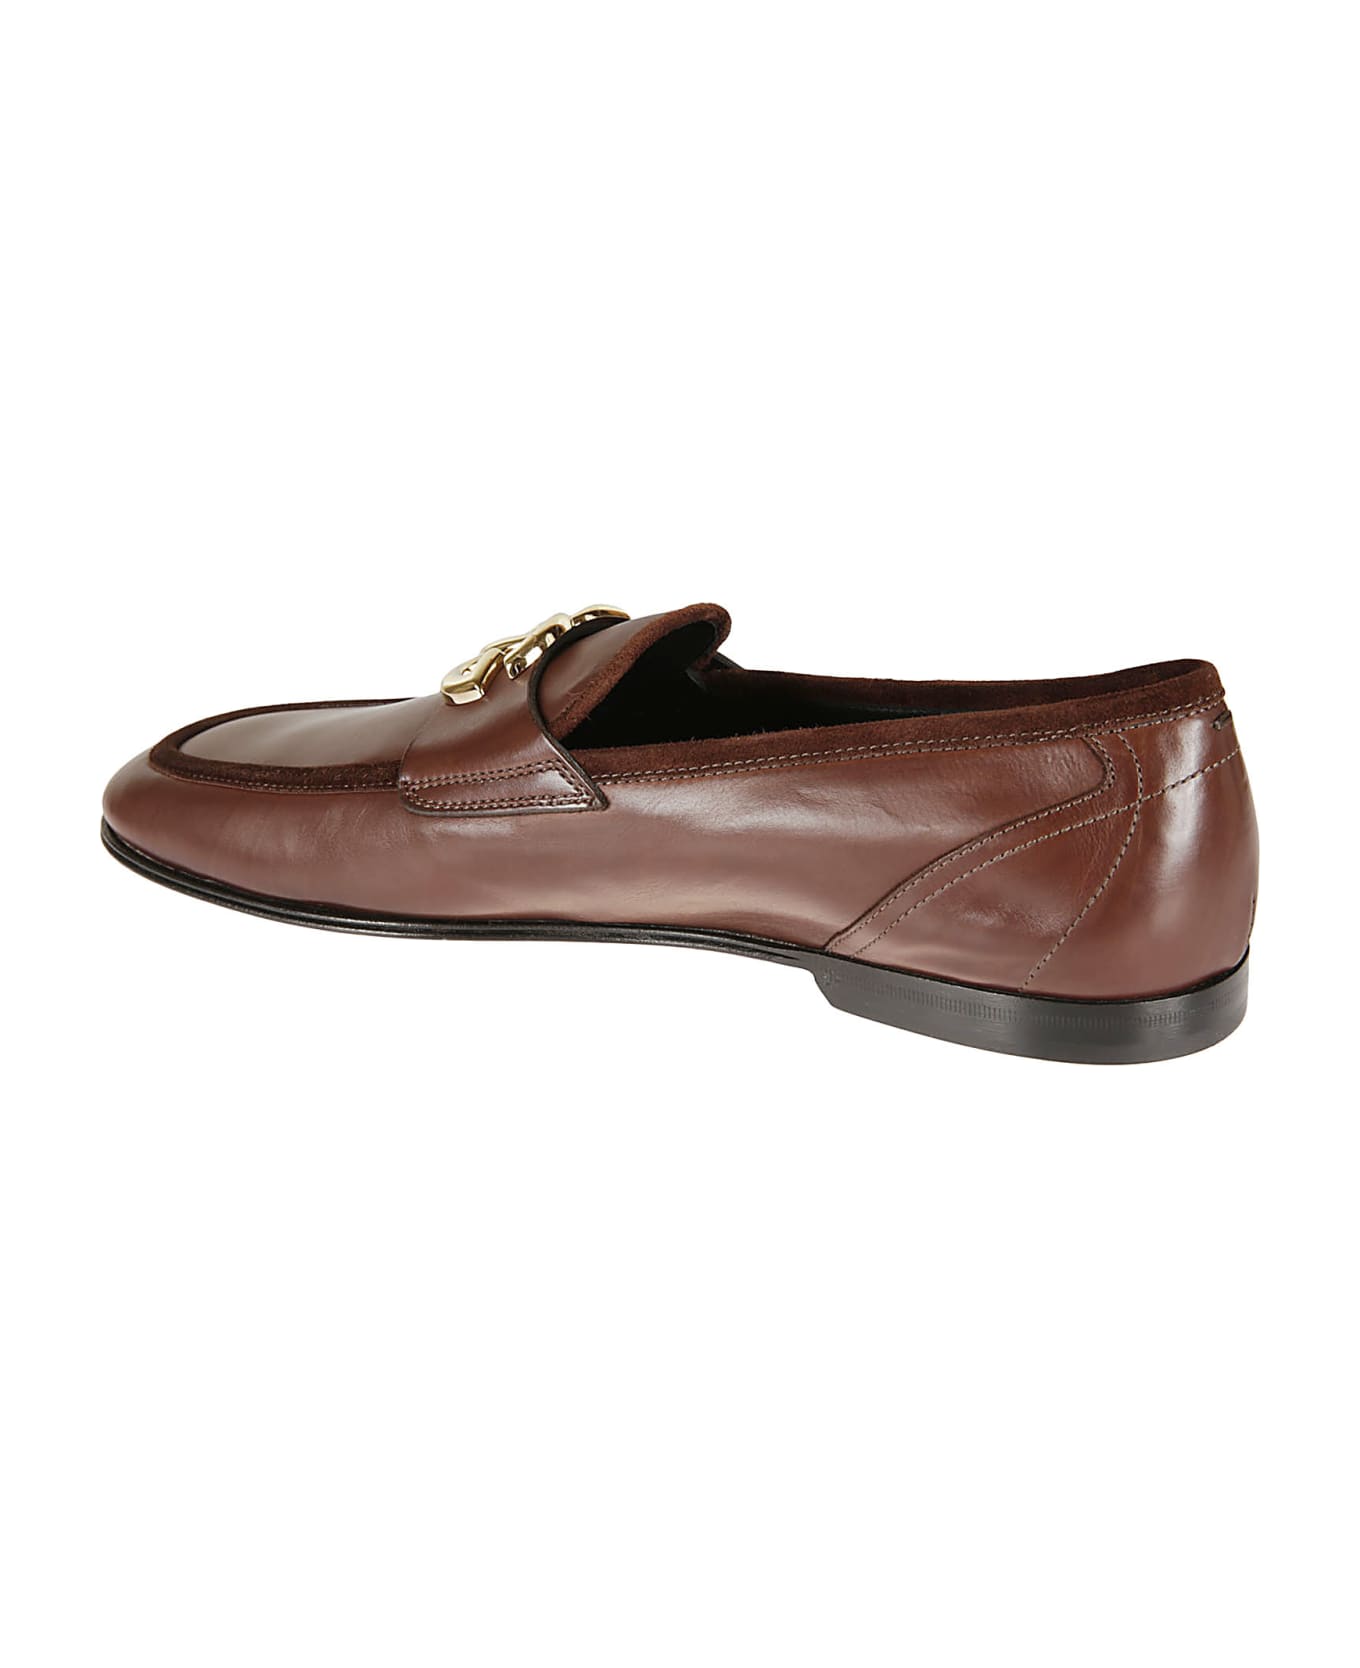 Dolce & Gabbana Logo Plaque Loafers - Brown